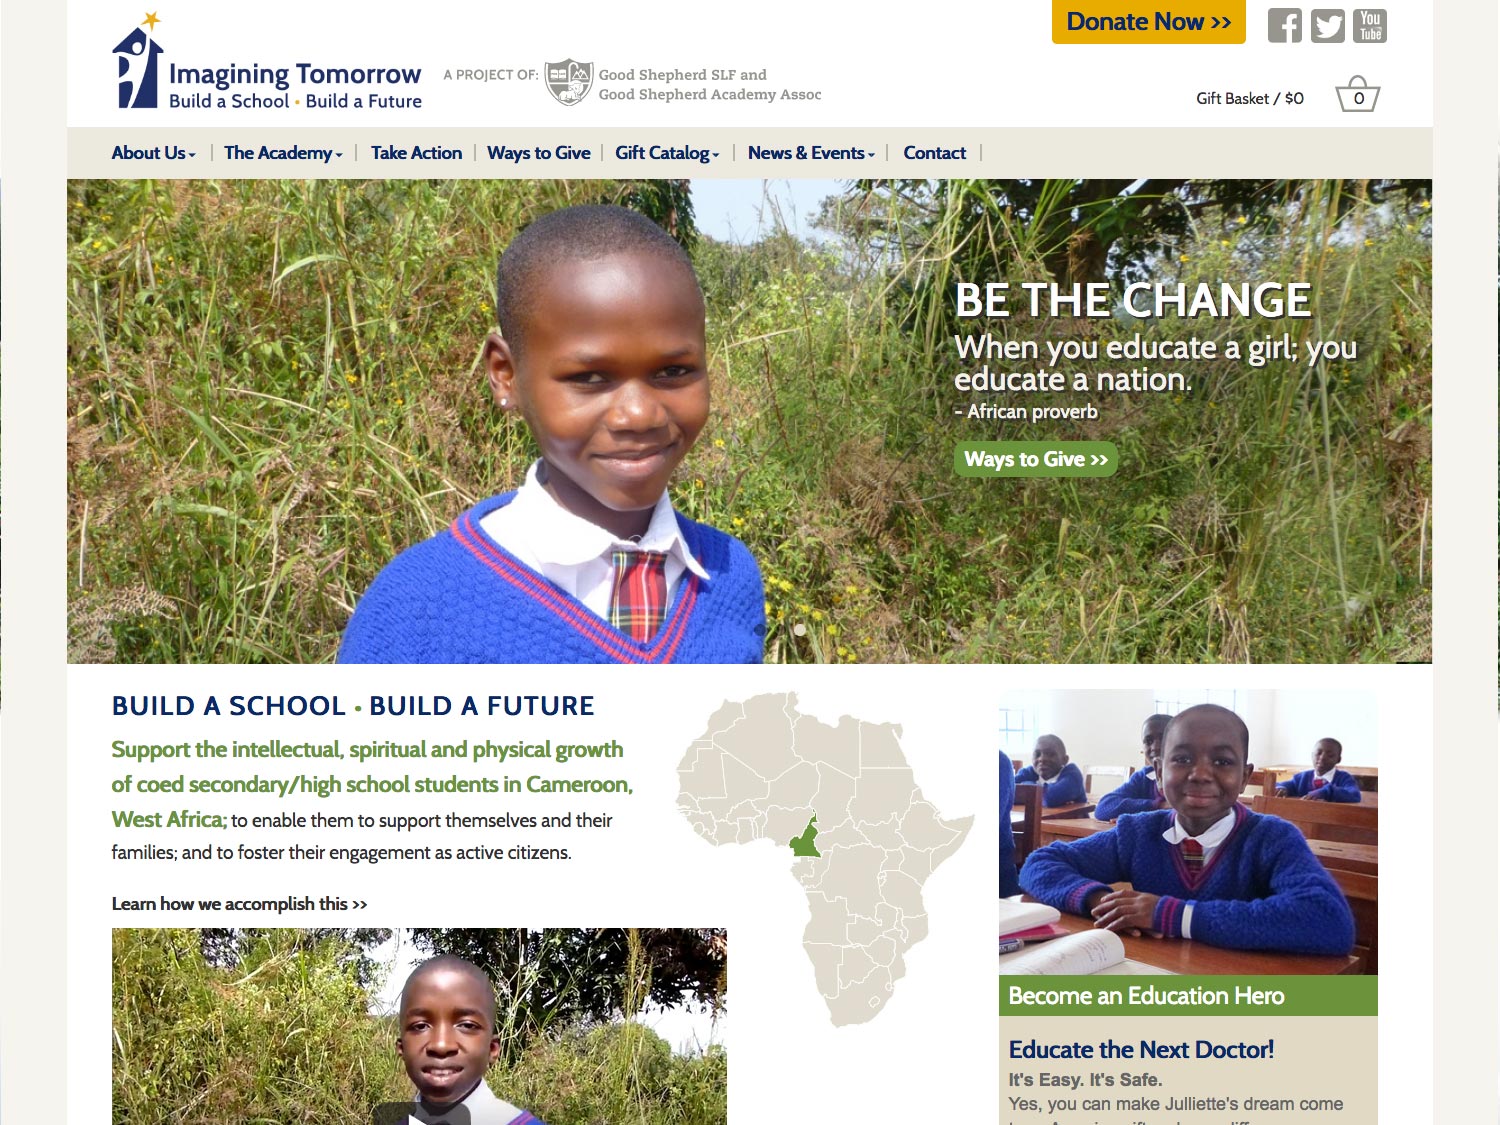 Homepage for building a future for Cameroonian students